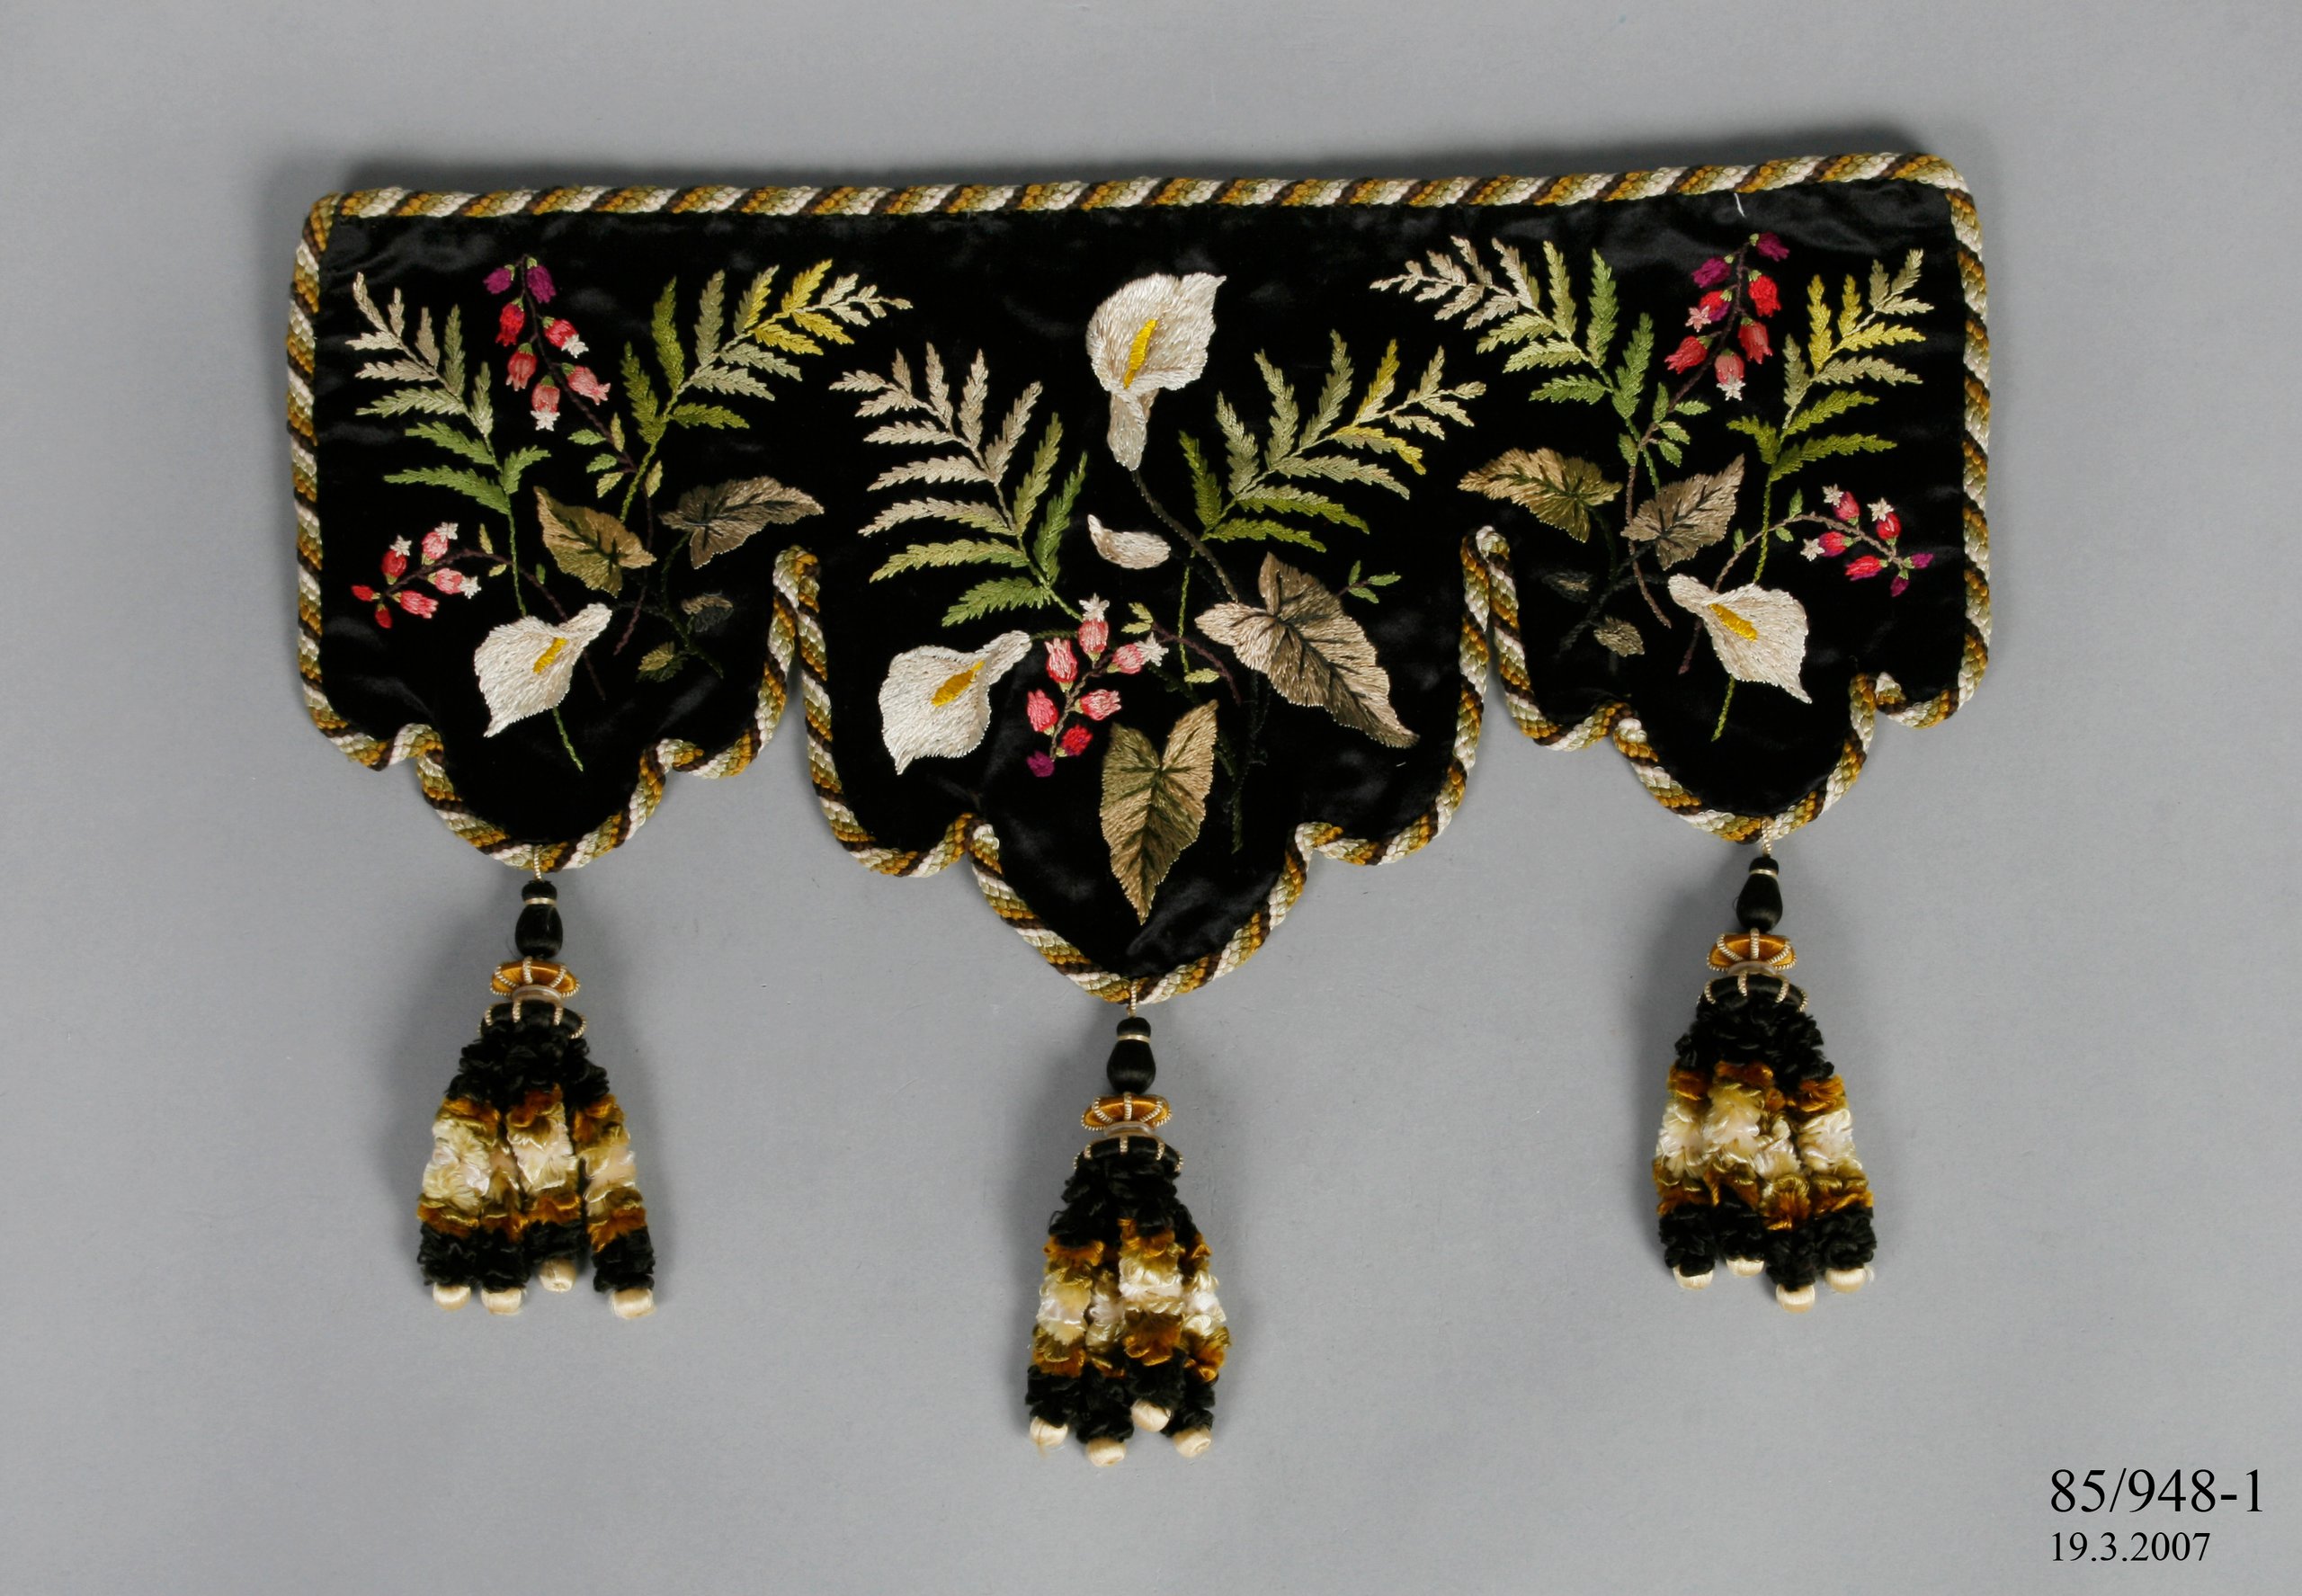 Valance made by Isabella Murray (daughter-in-law of Sir Henry Parkes)